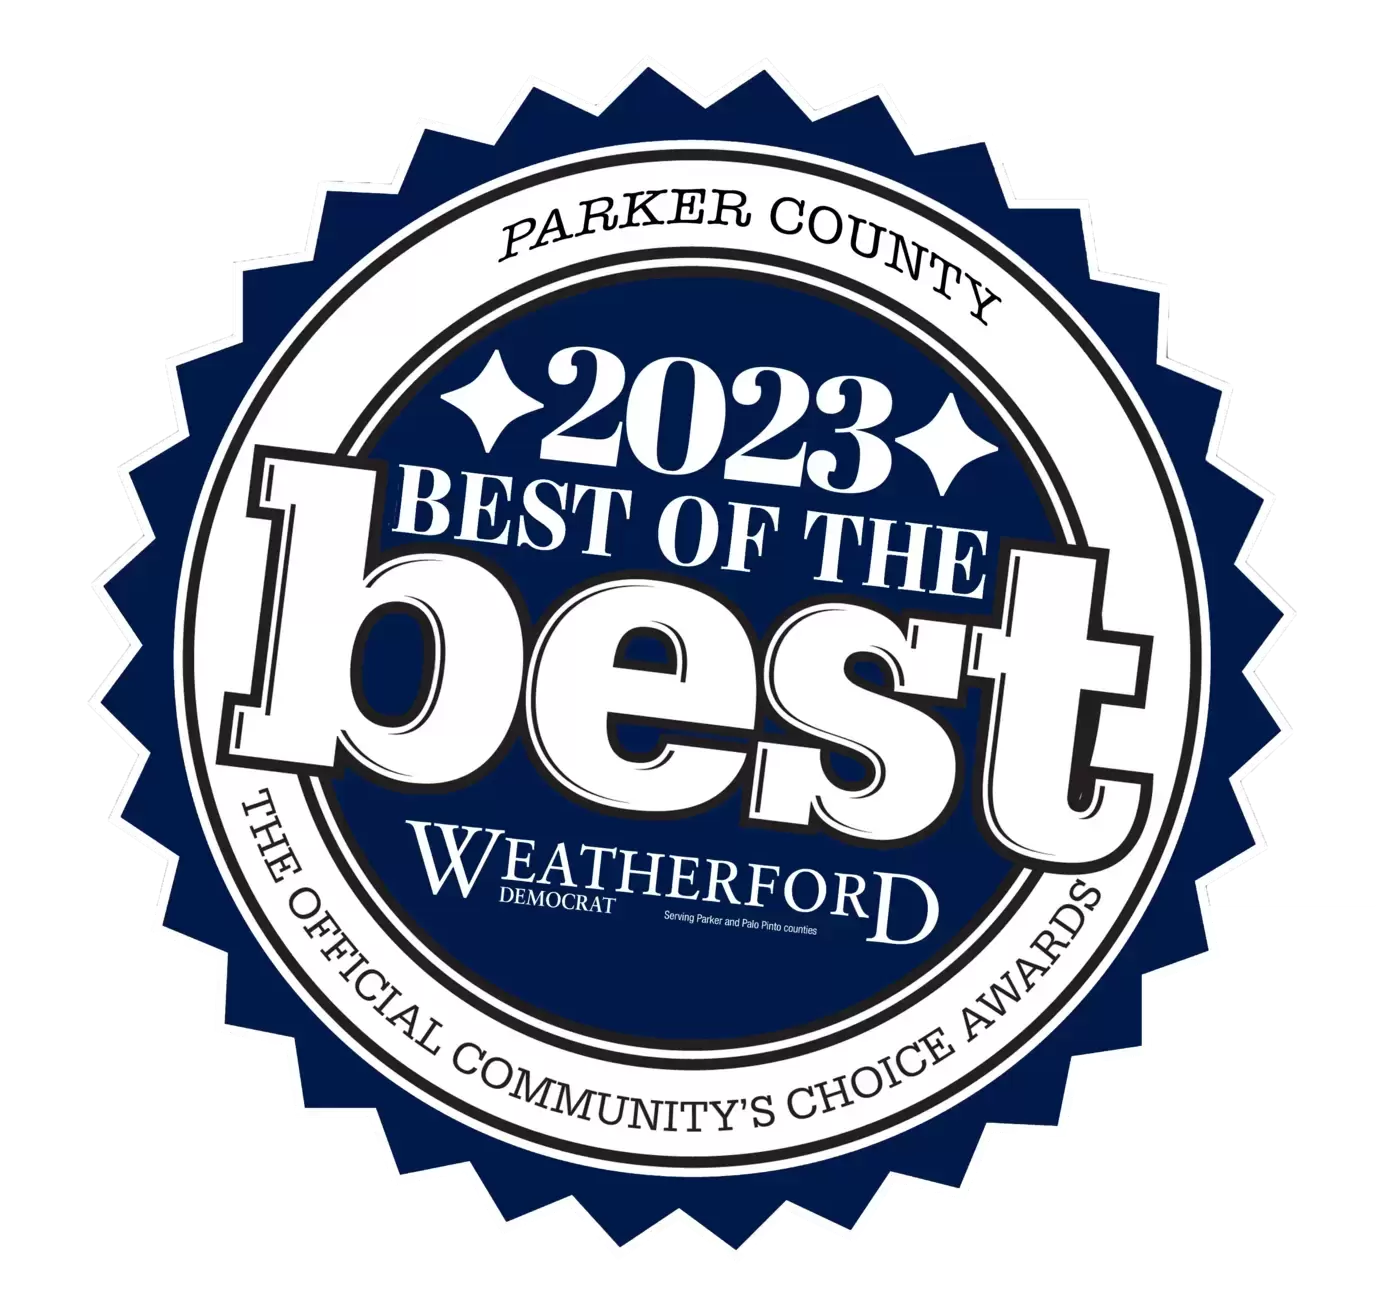 The best of the best weatherford logo.